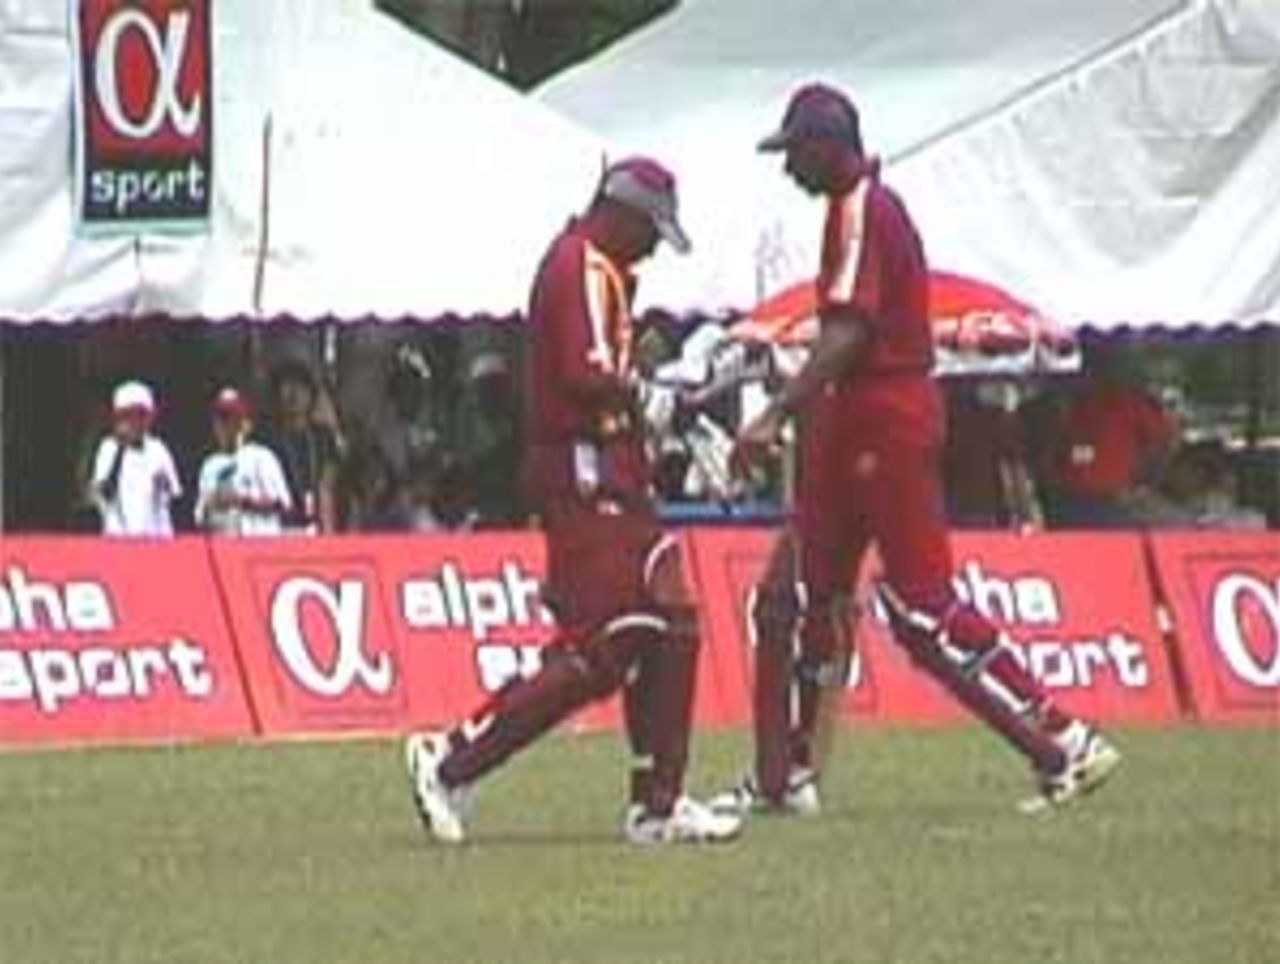 Mclean's departs, India v West Indies (3rd ODI), Coca-Cola Singapore Challenge, 1999-2000, Kallang Ground, Singapore, 5 Sep 1999.